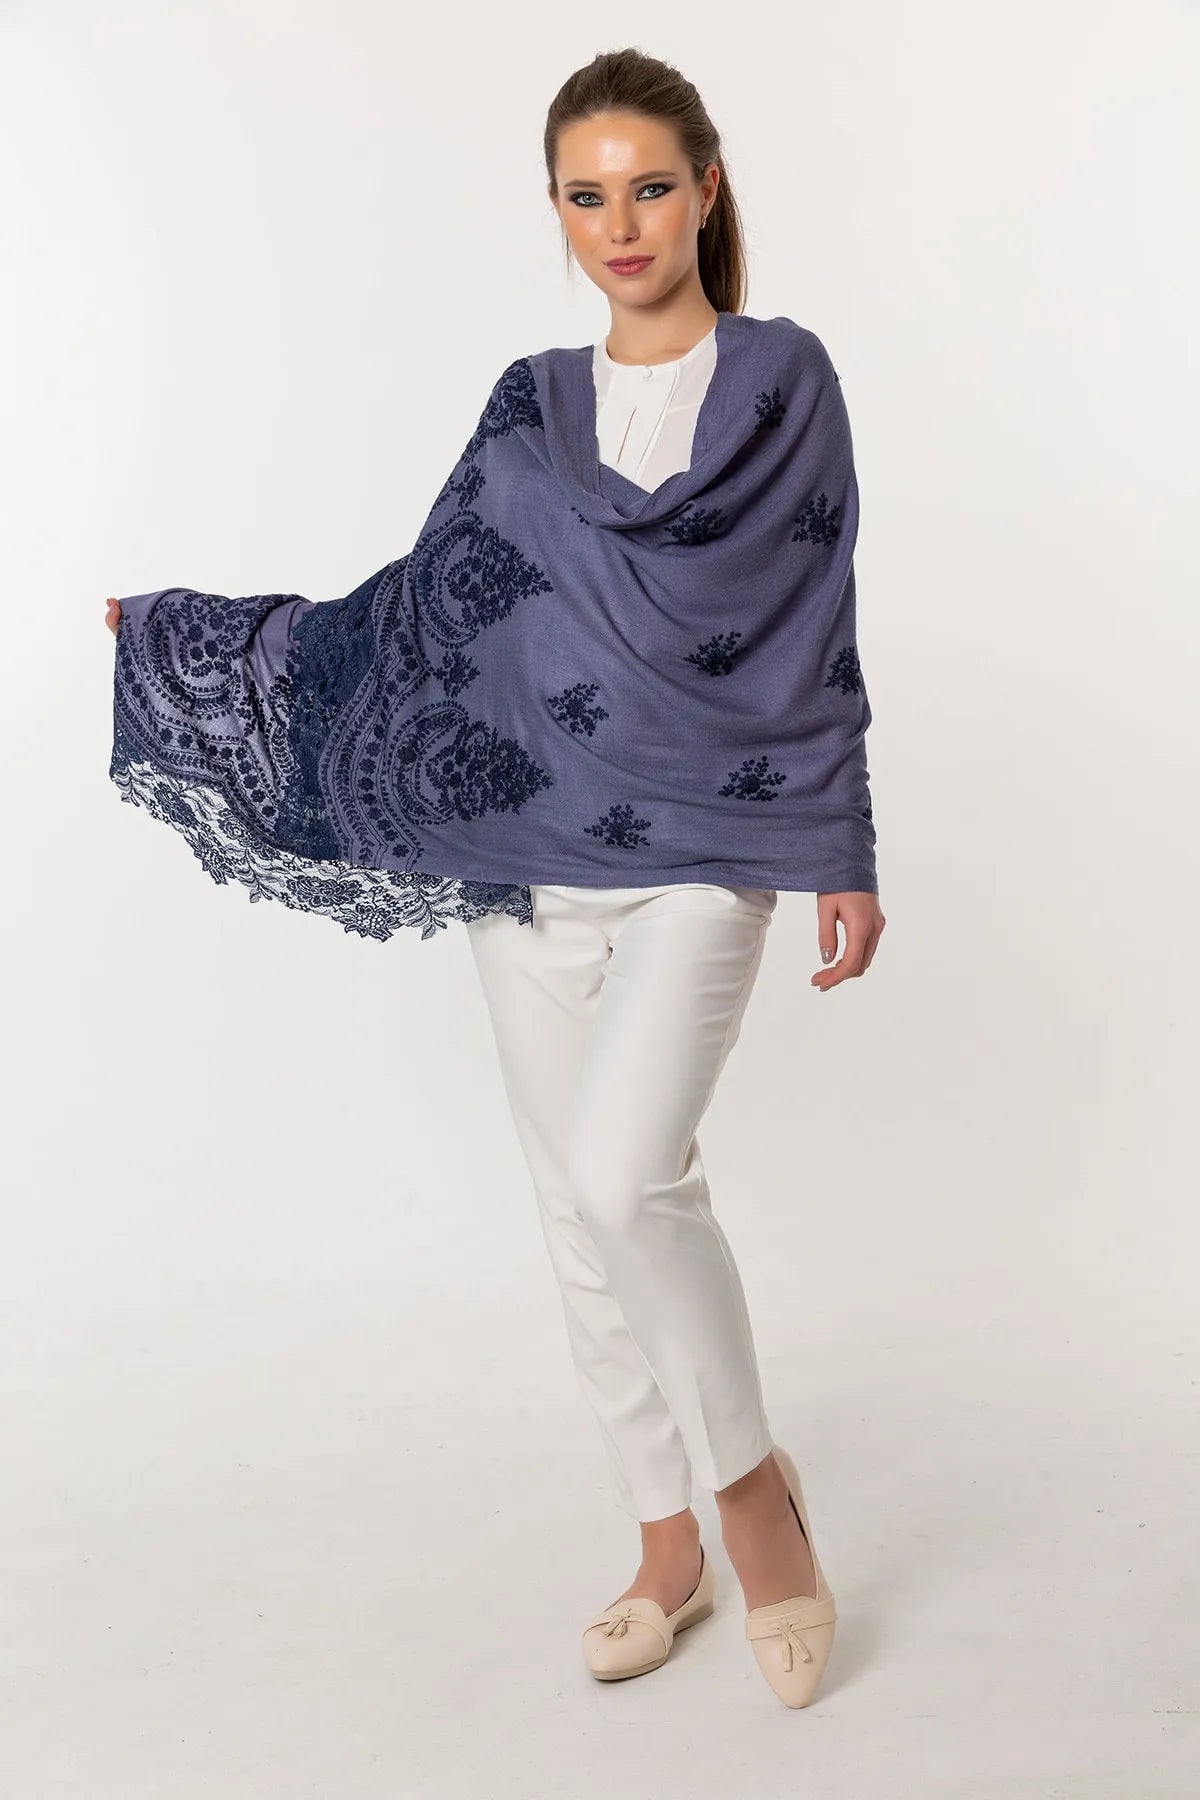 Embroidery Lace Edges Cashmere & Silk - Gray Navy